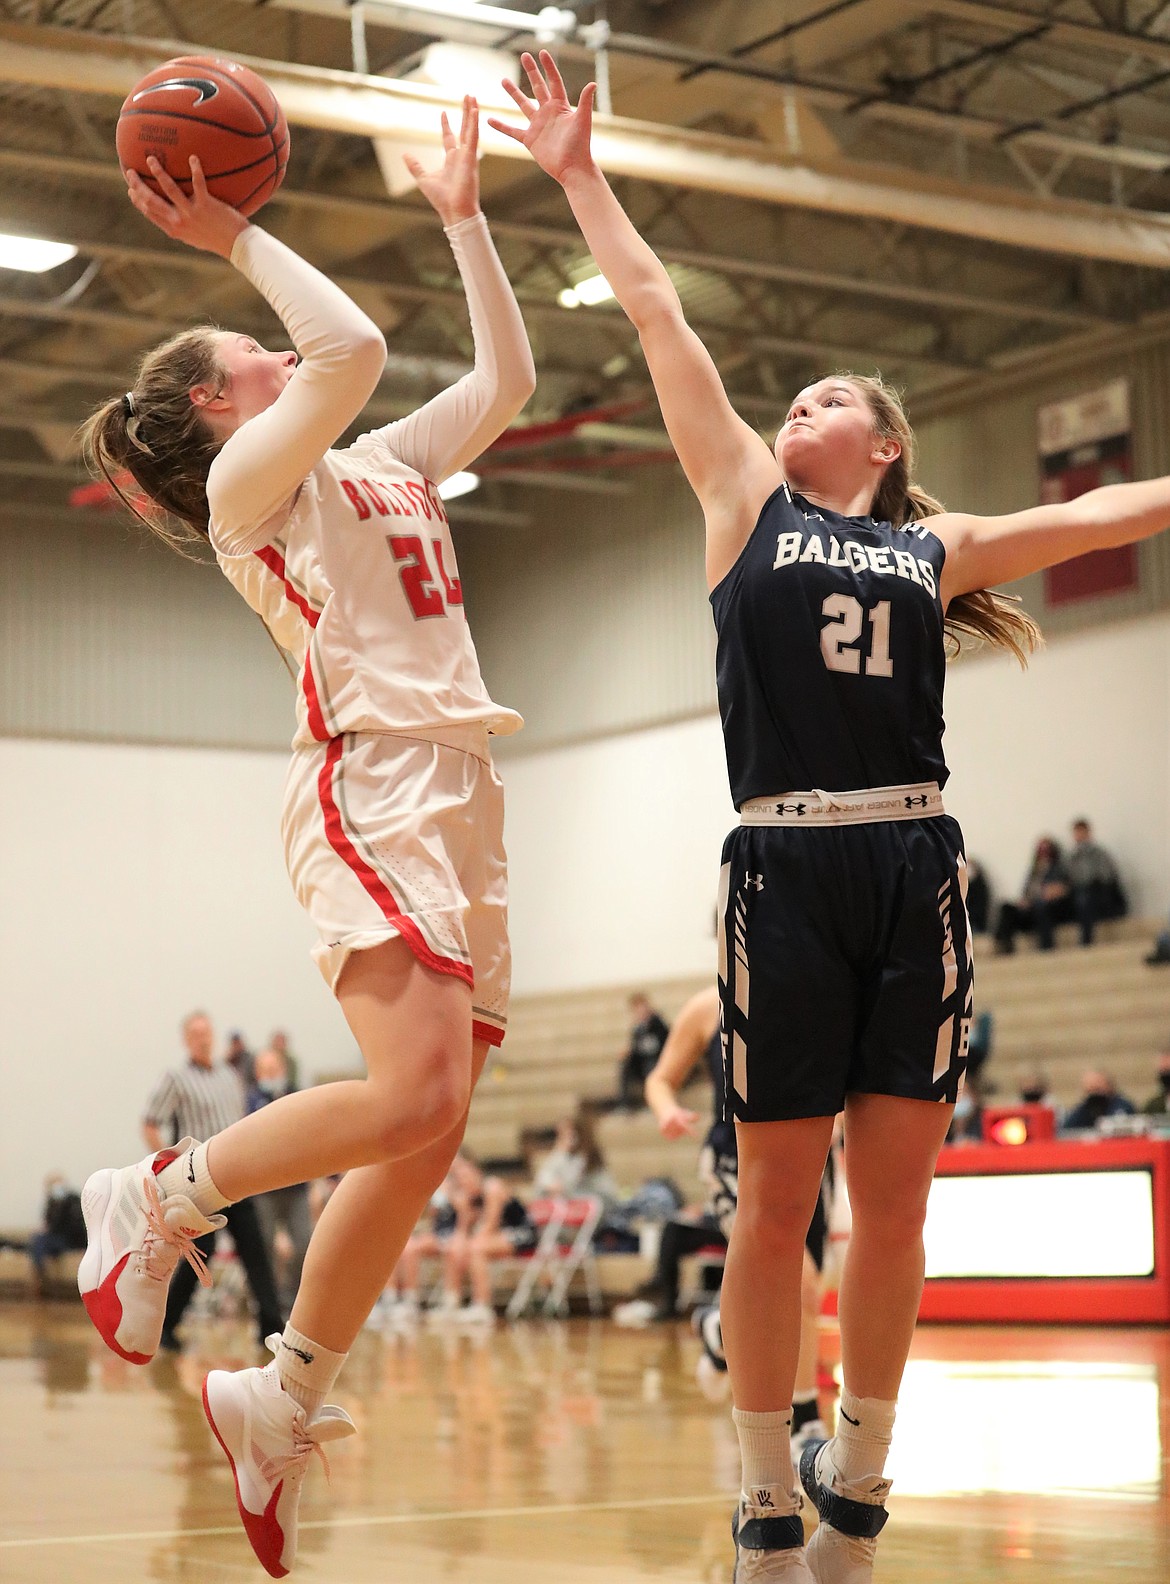 Sandpoint senior Kaylee Banks drives to the basket and attempts a shot over a Bonners Ferry defender on Jan. 5 at Les Rogers Court.